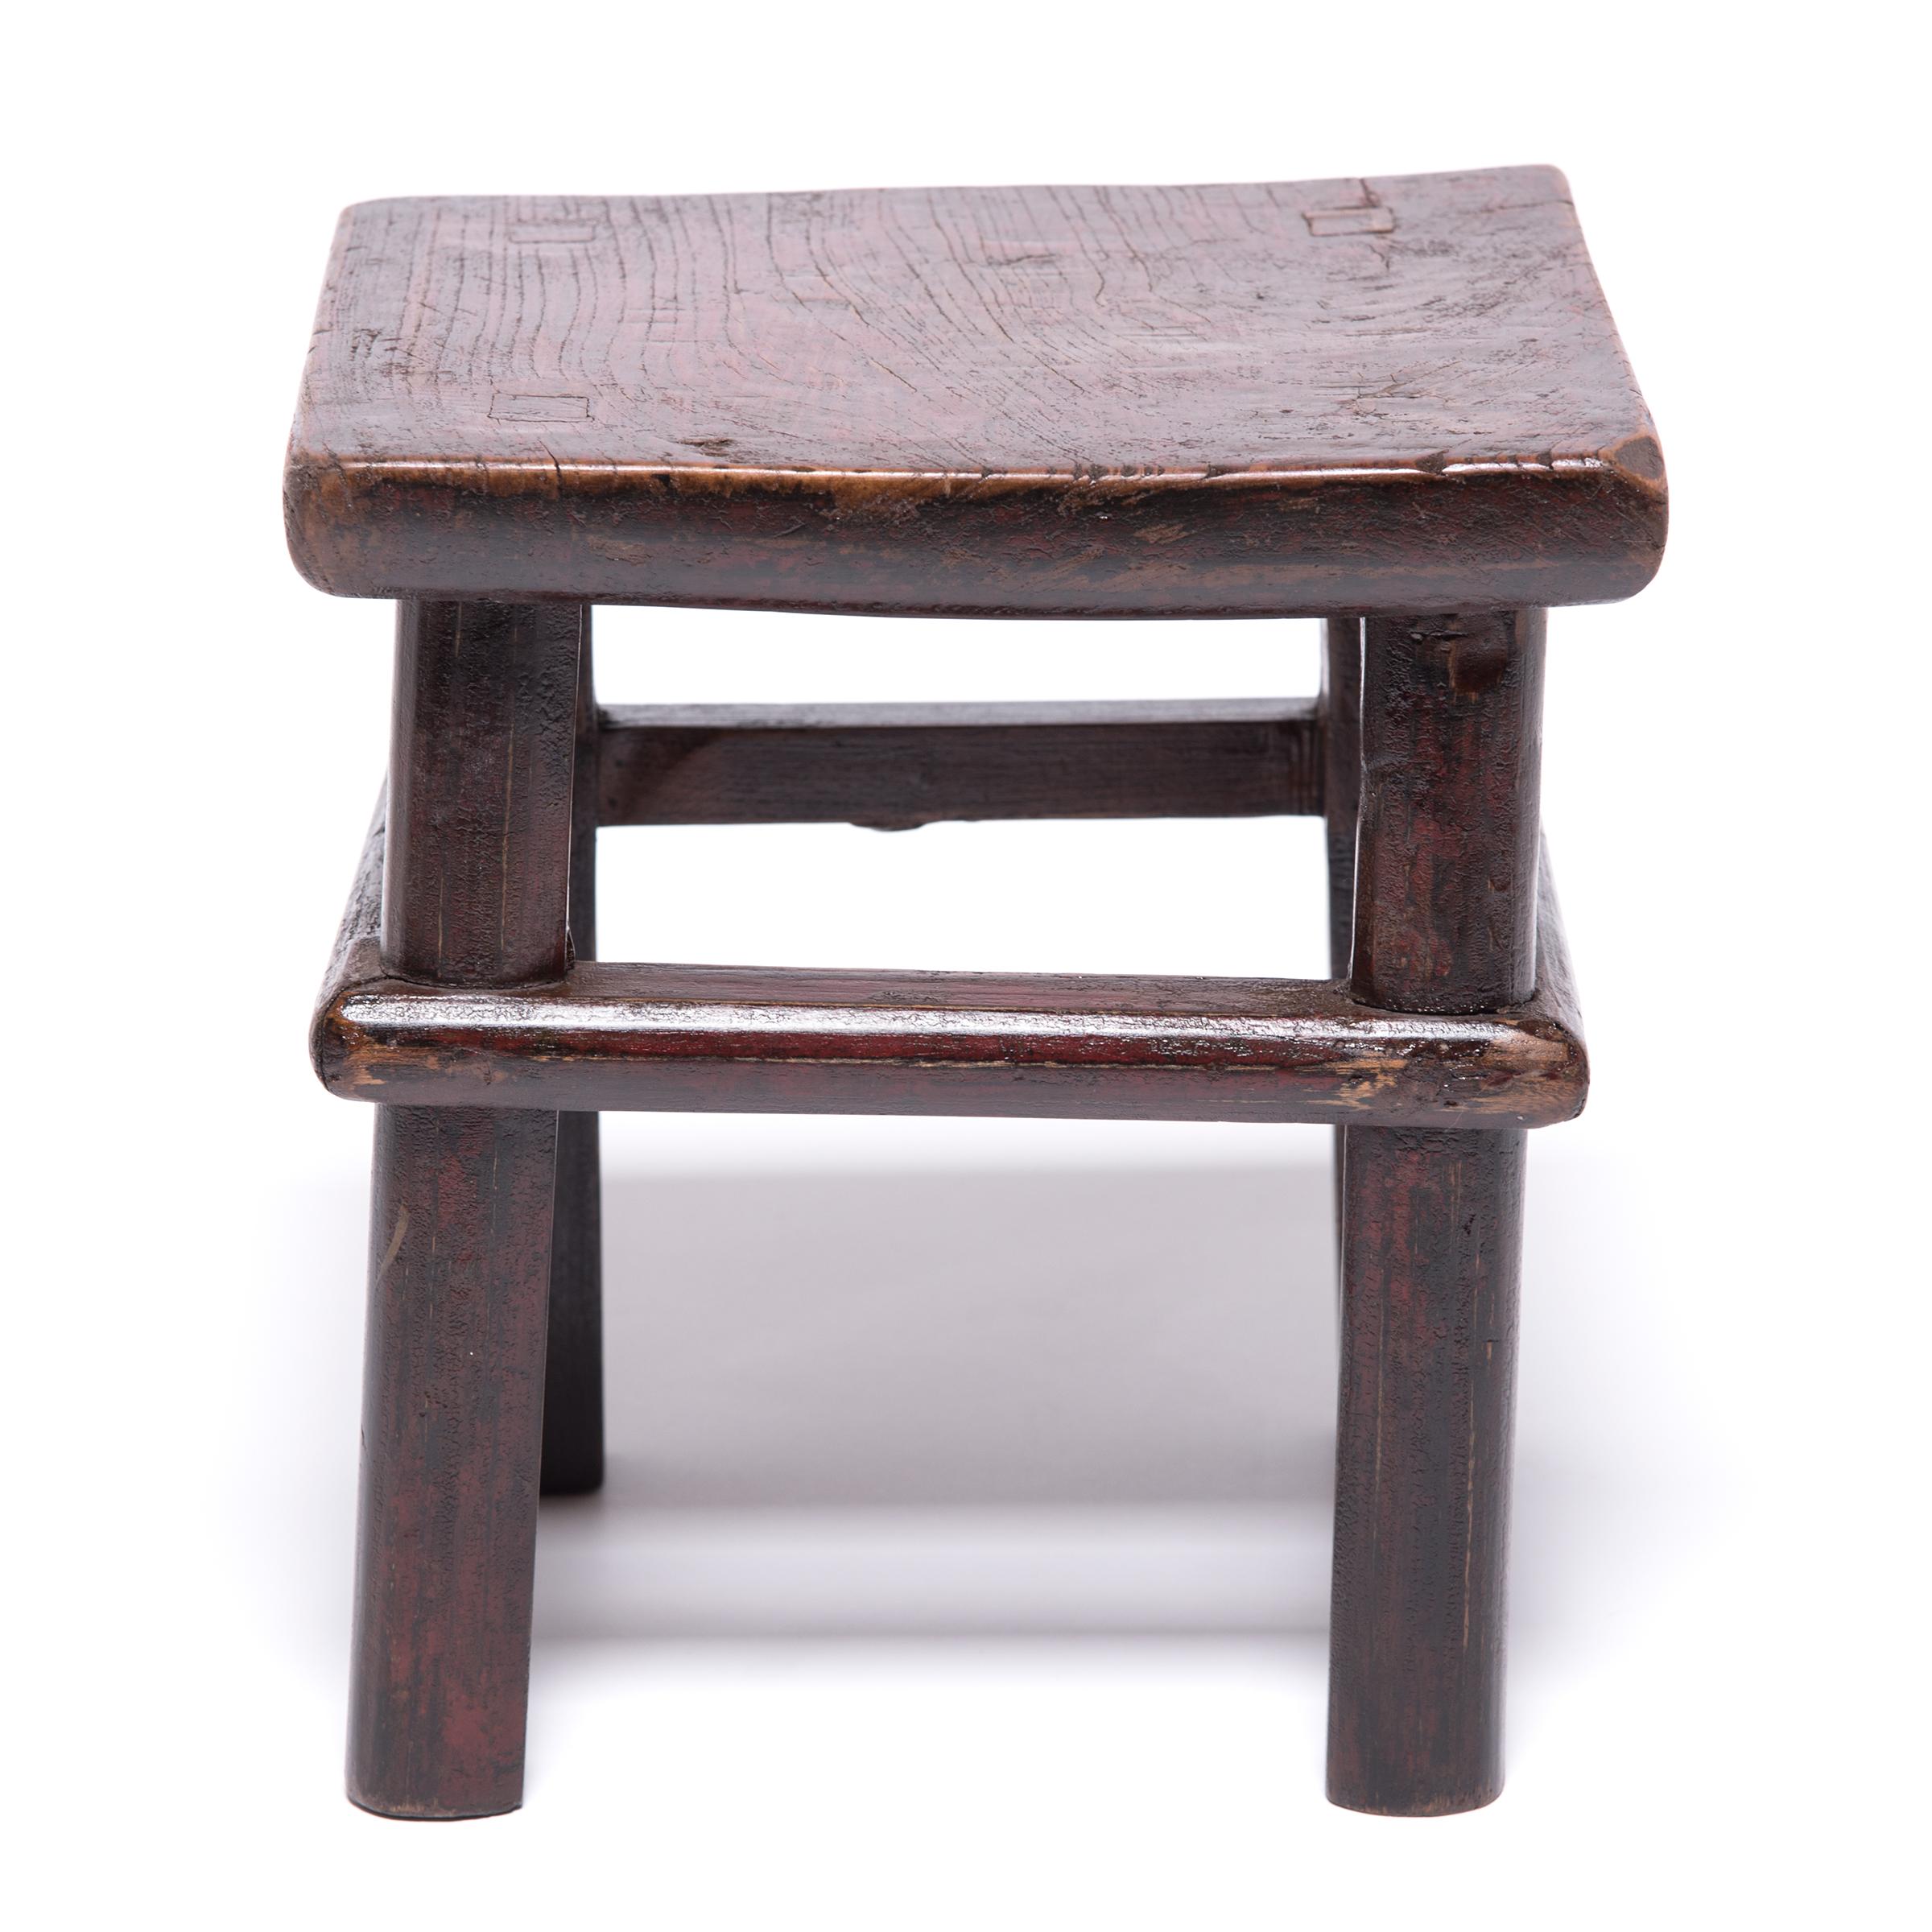 Qing Mid-19th Century Chinese Feng Deng Stool